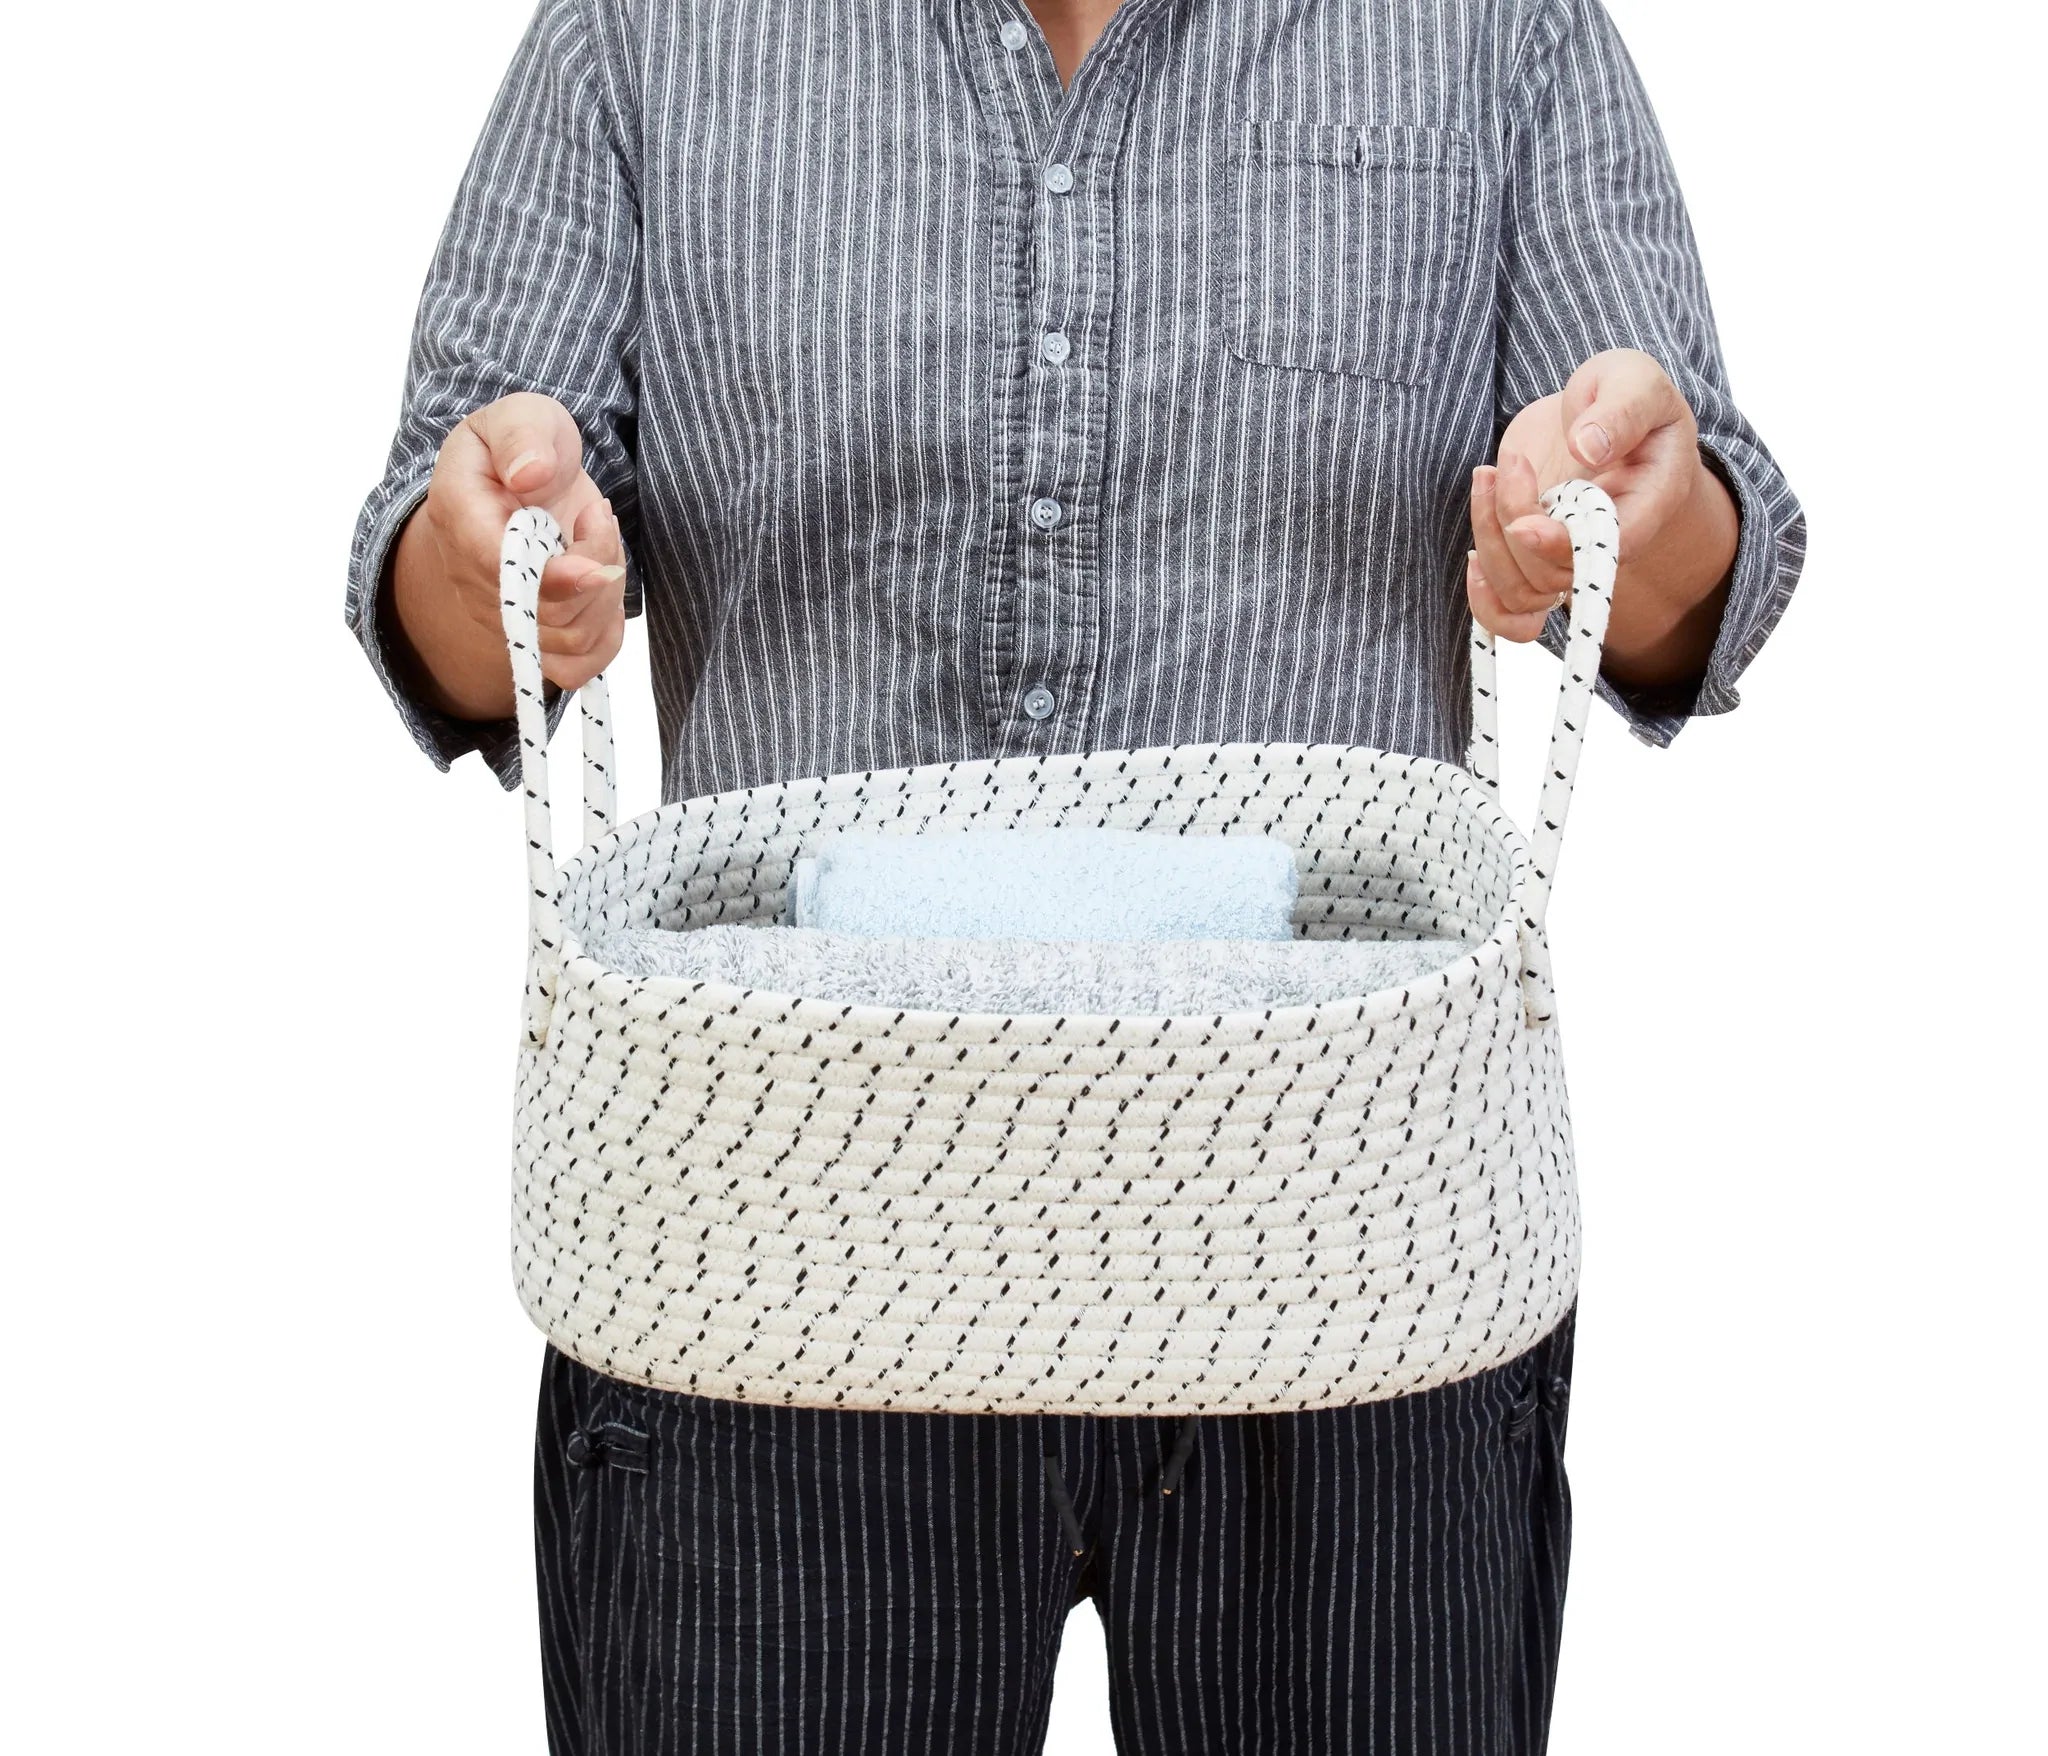 Nested Cotton Rope Basket 5-pack various size